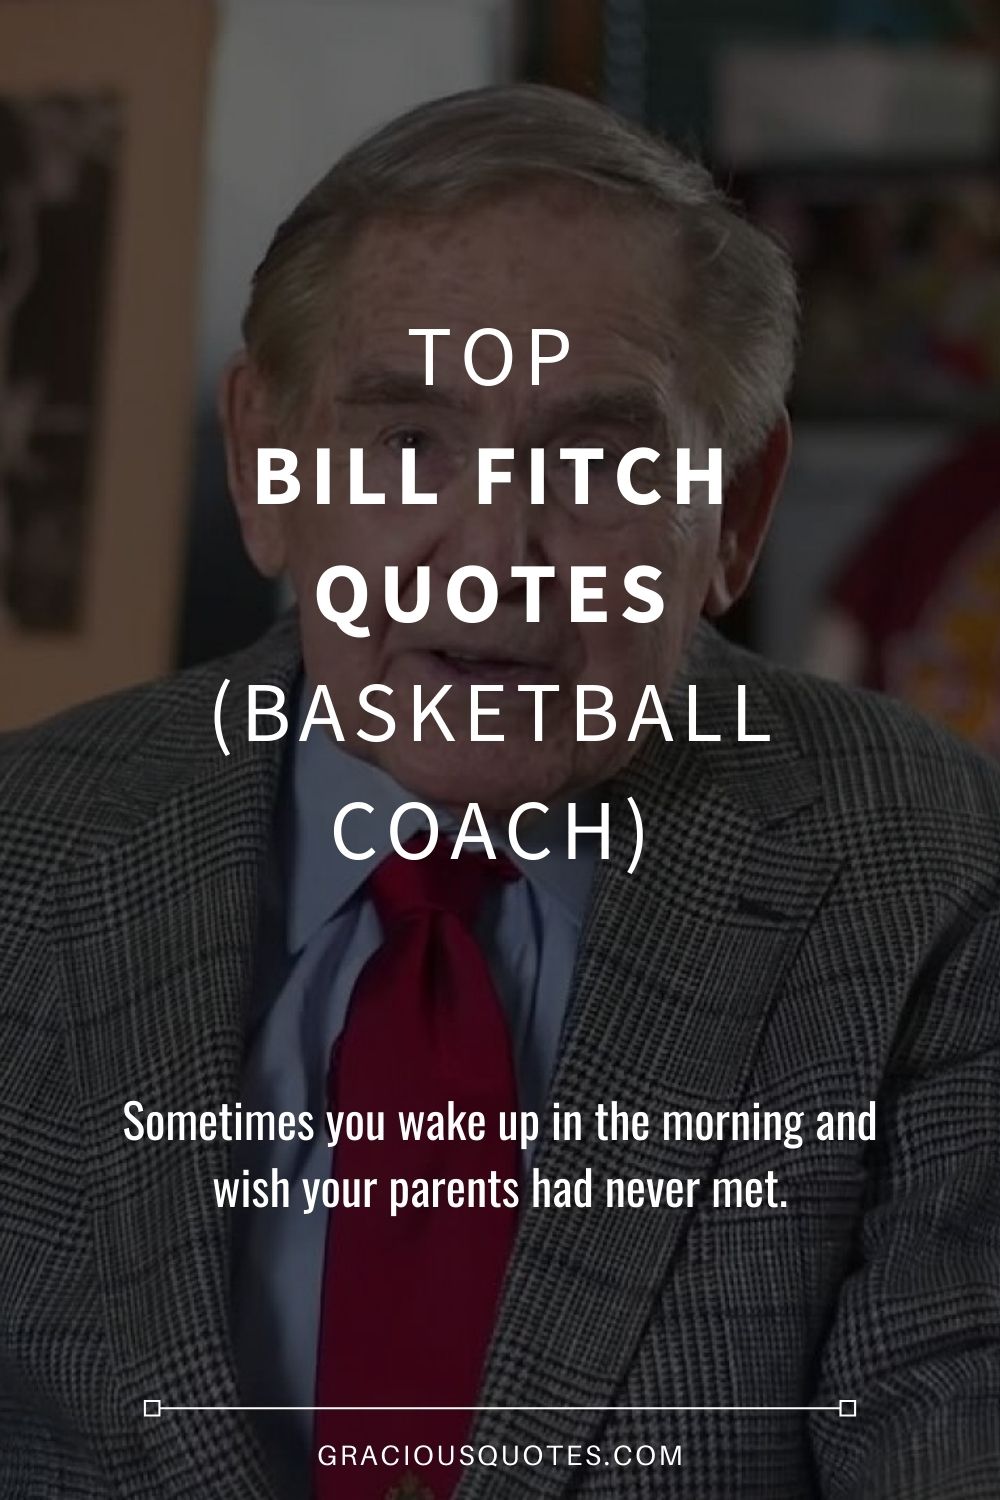 TOP Bill Fitch Quotes (BASKETBALL COACH) - Gracious Quotes